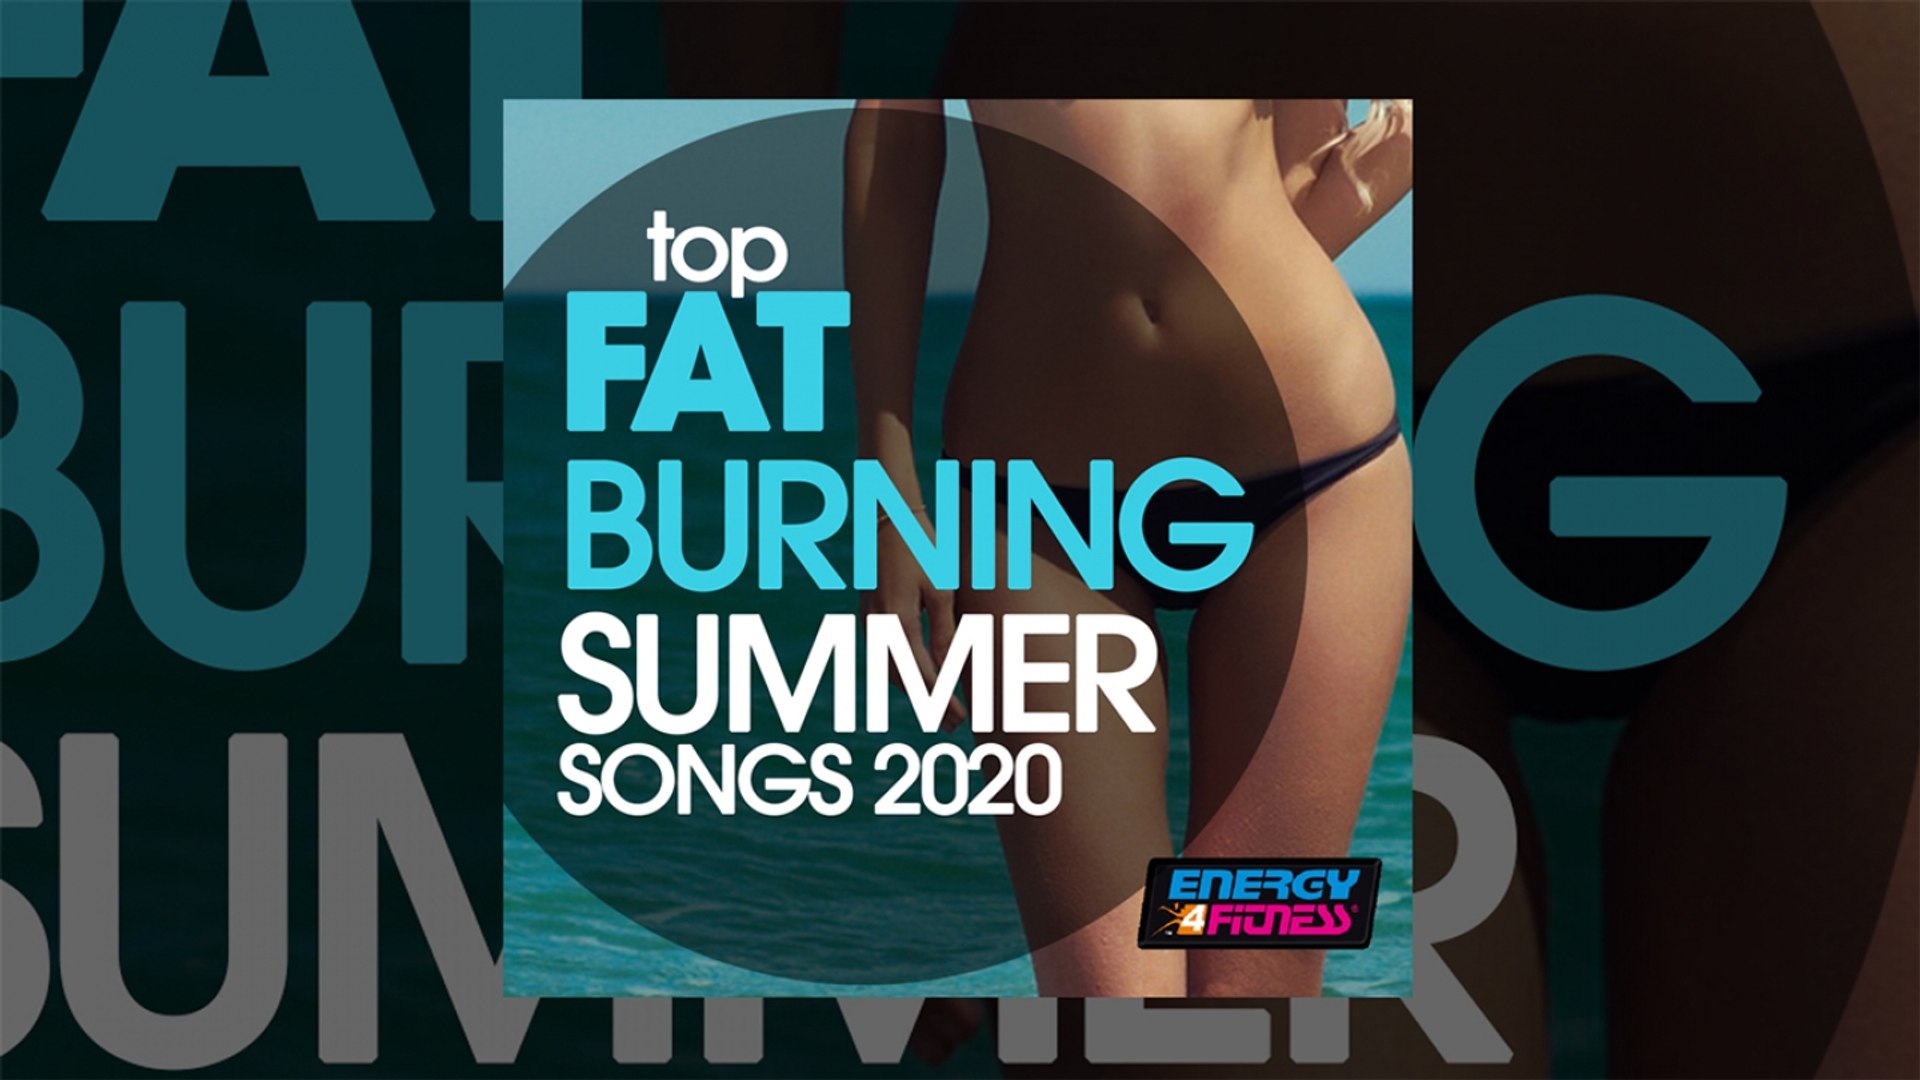 E4F - Top Fat Burning Summer Songs 2020 - Fitness & Music 2020